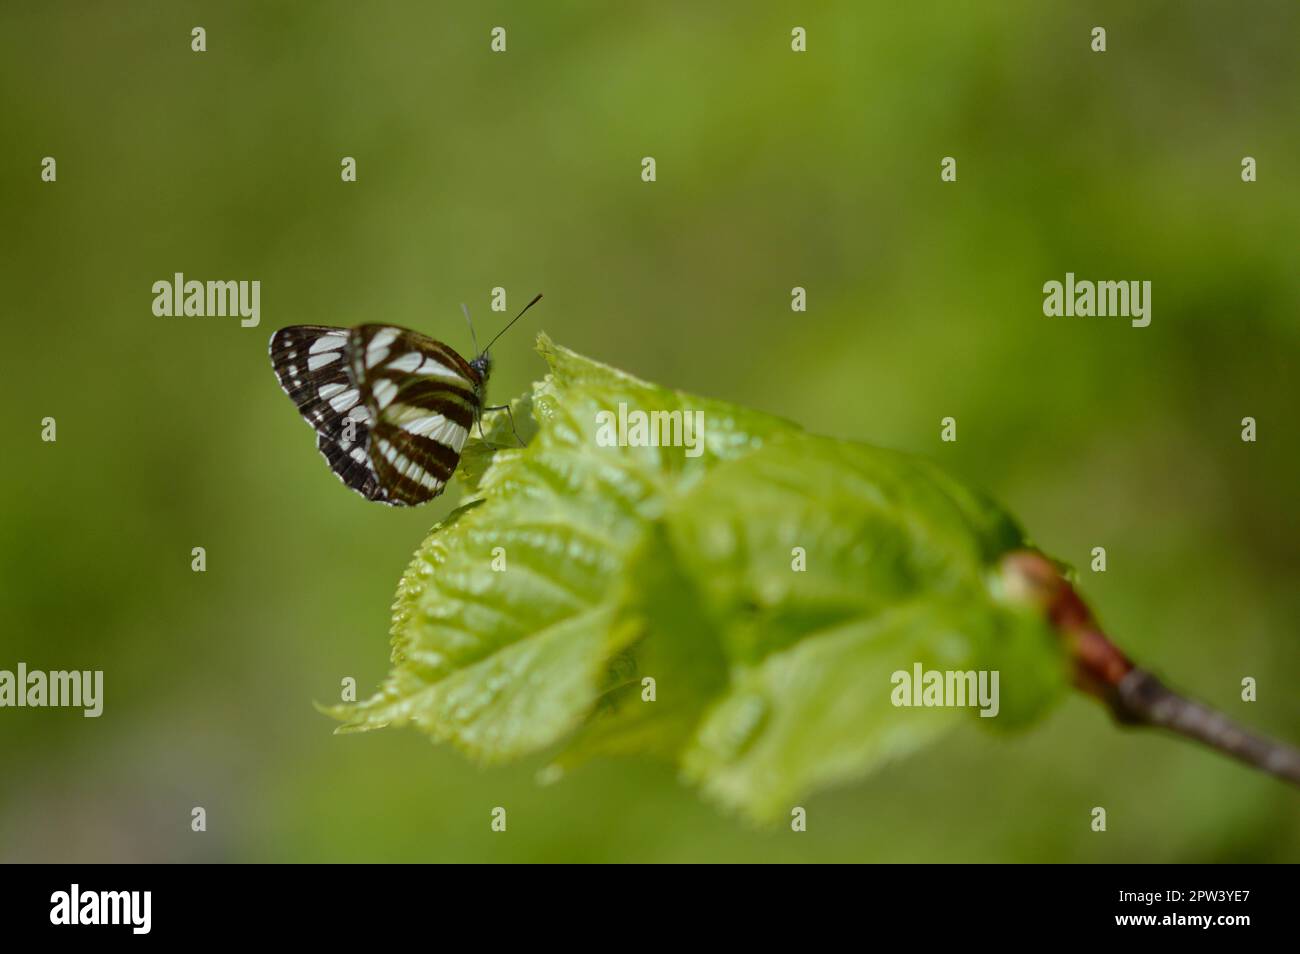 Common sailor, brown and white butterfly on a green leaf macro close up. Stock Photo